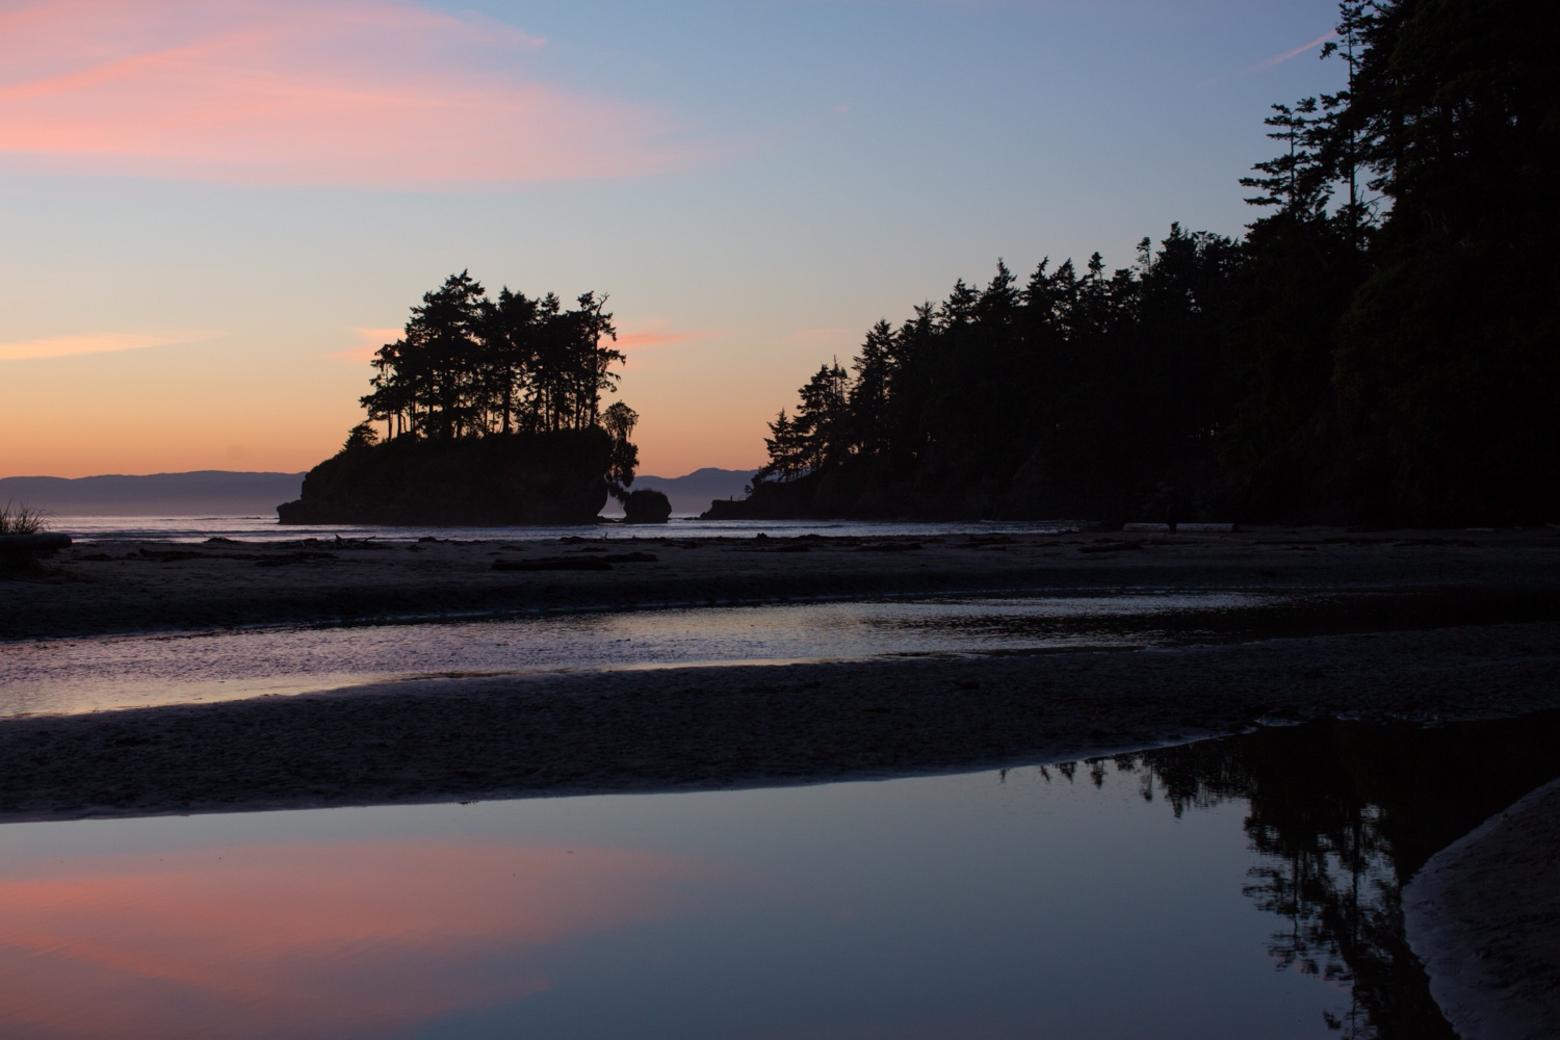 The quietest spot in the Lower 48, the author says, resides just east of the intersection of ocean and rainforest but it faces sonic inundation from Navy jet training exercises.  Photo courtesy Gordon Hempton